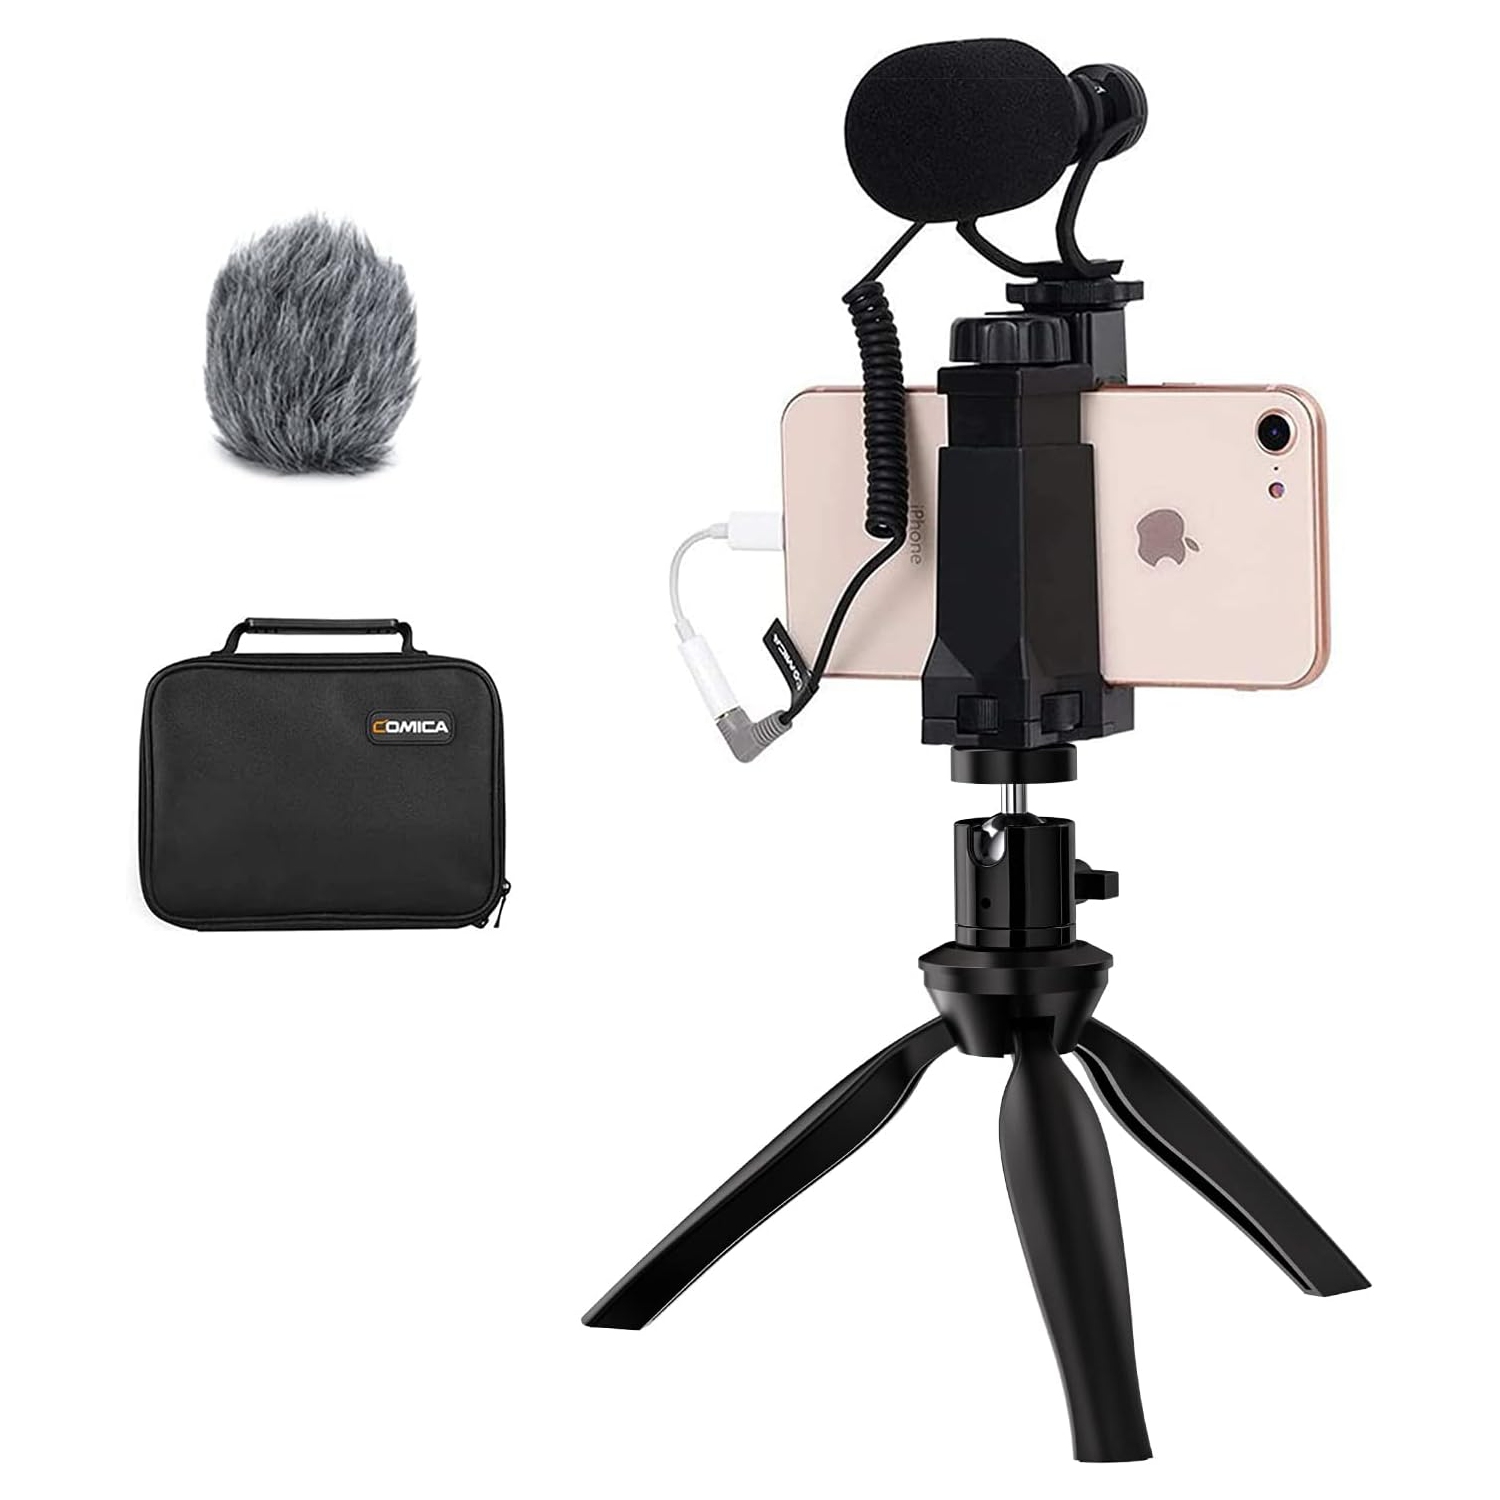 Smartphone Microphone Kit with Tripod, Microphone for iPhone 6, 7, 8, X, 11,12,13 and Android Smartphones - External Video Shotgun Mic for TikTok Vlogging Equipment